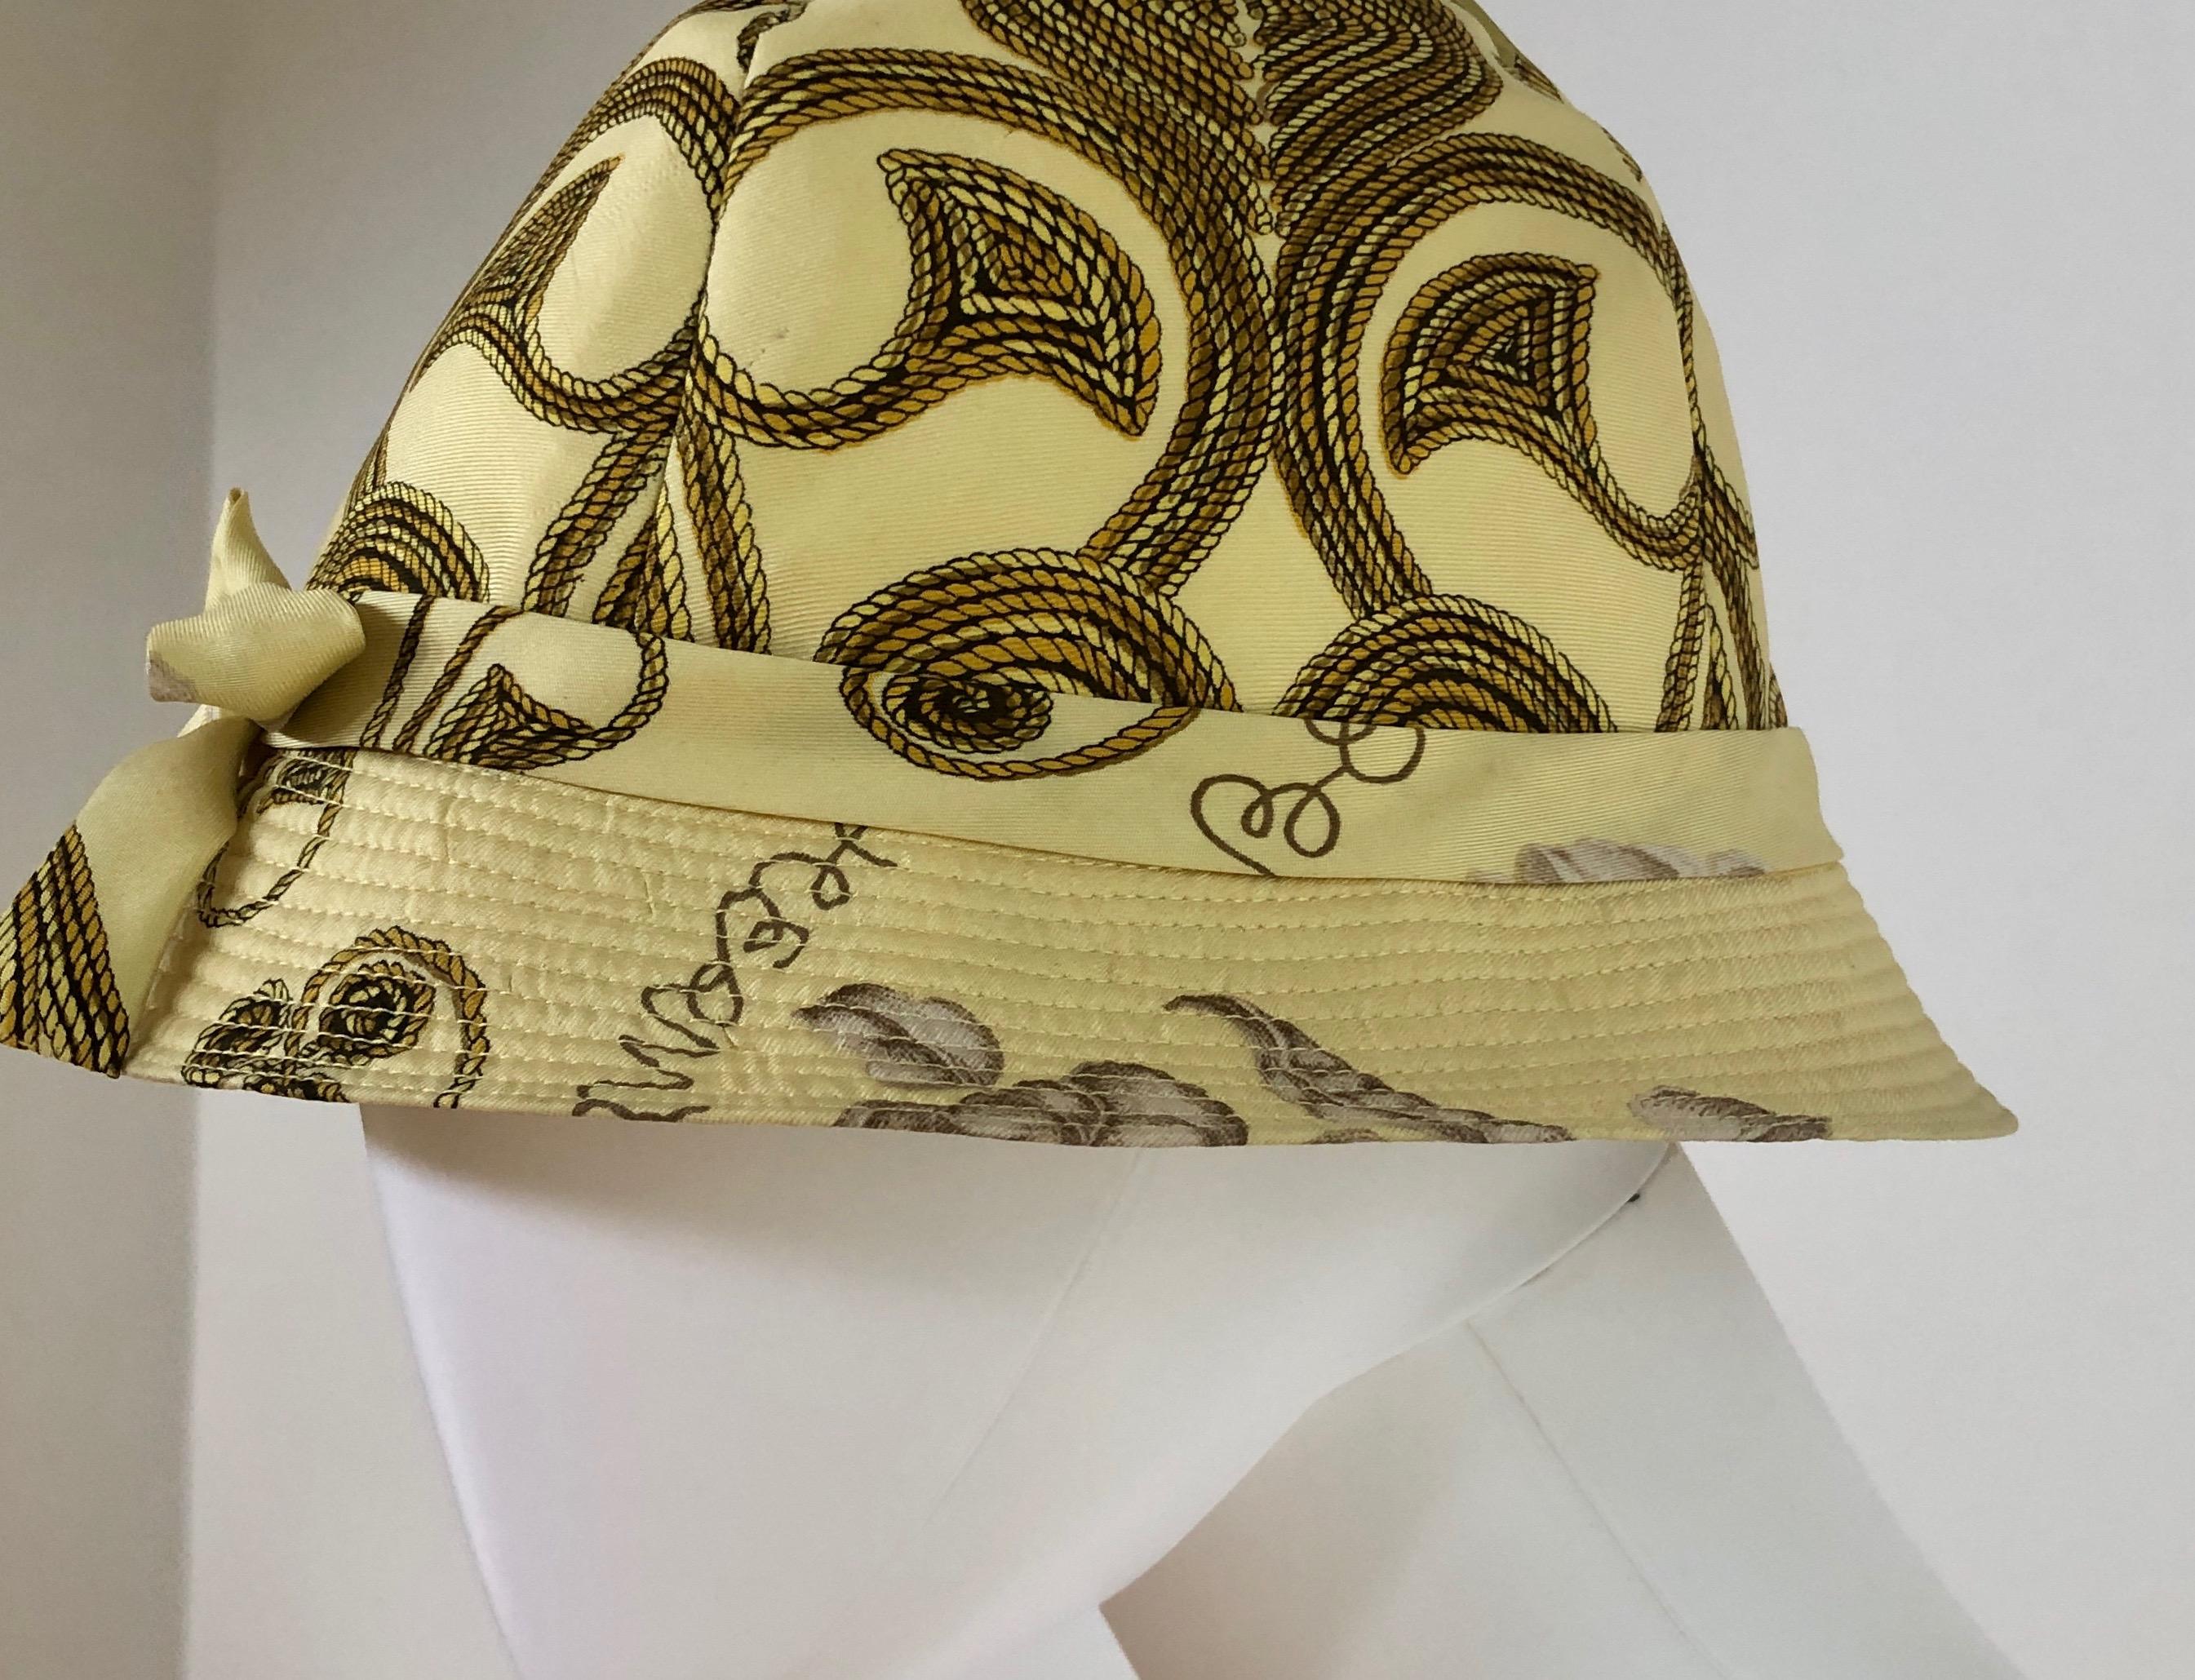 Offered is an Hermes Yellow, Gold and Ivory silk cloche / bucket hat with a dainty bow to the front center and a gold rope and floral theme.

Make:  Hermes (label reads Hermes Paris)
Place of manufacture:  France
Size:  58 (approximating)
Color: 